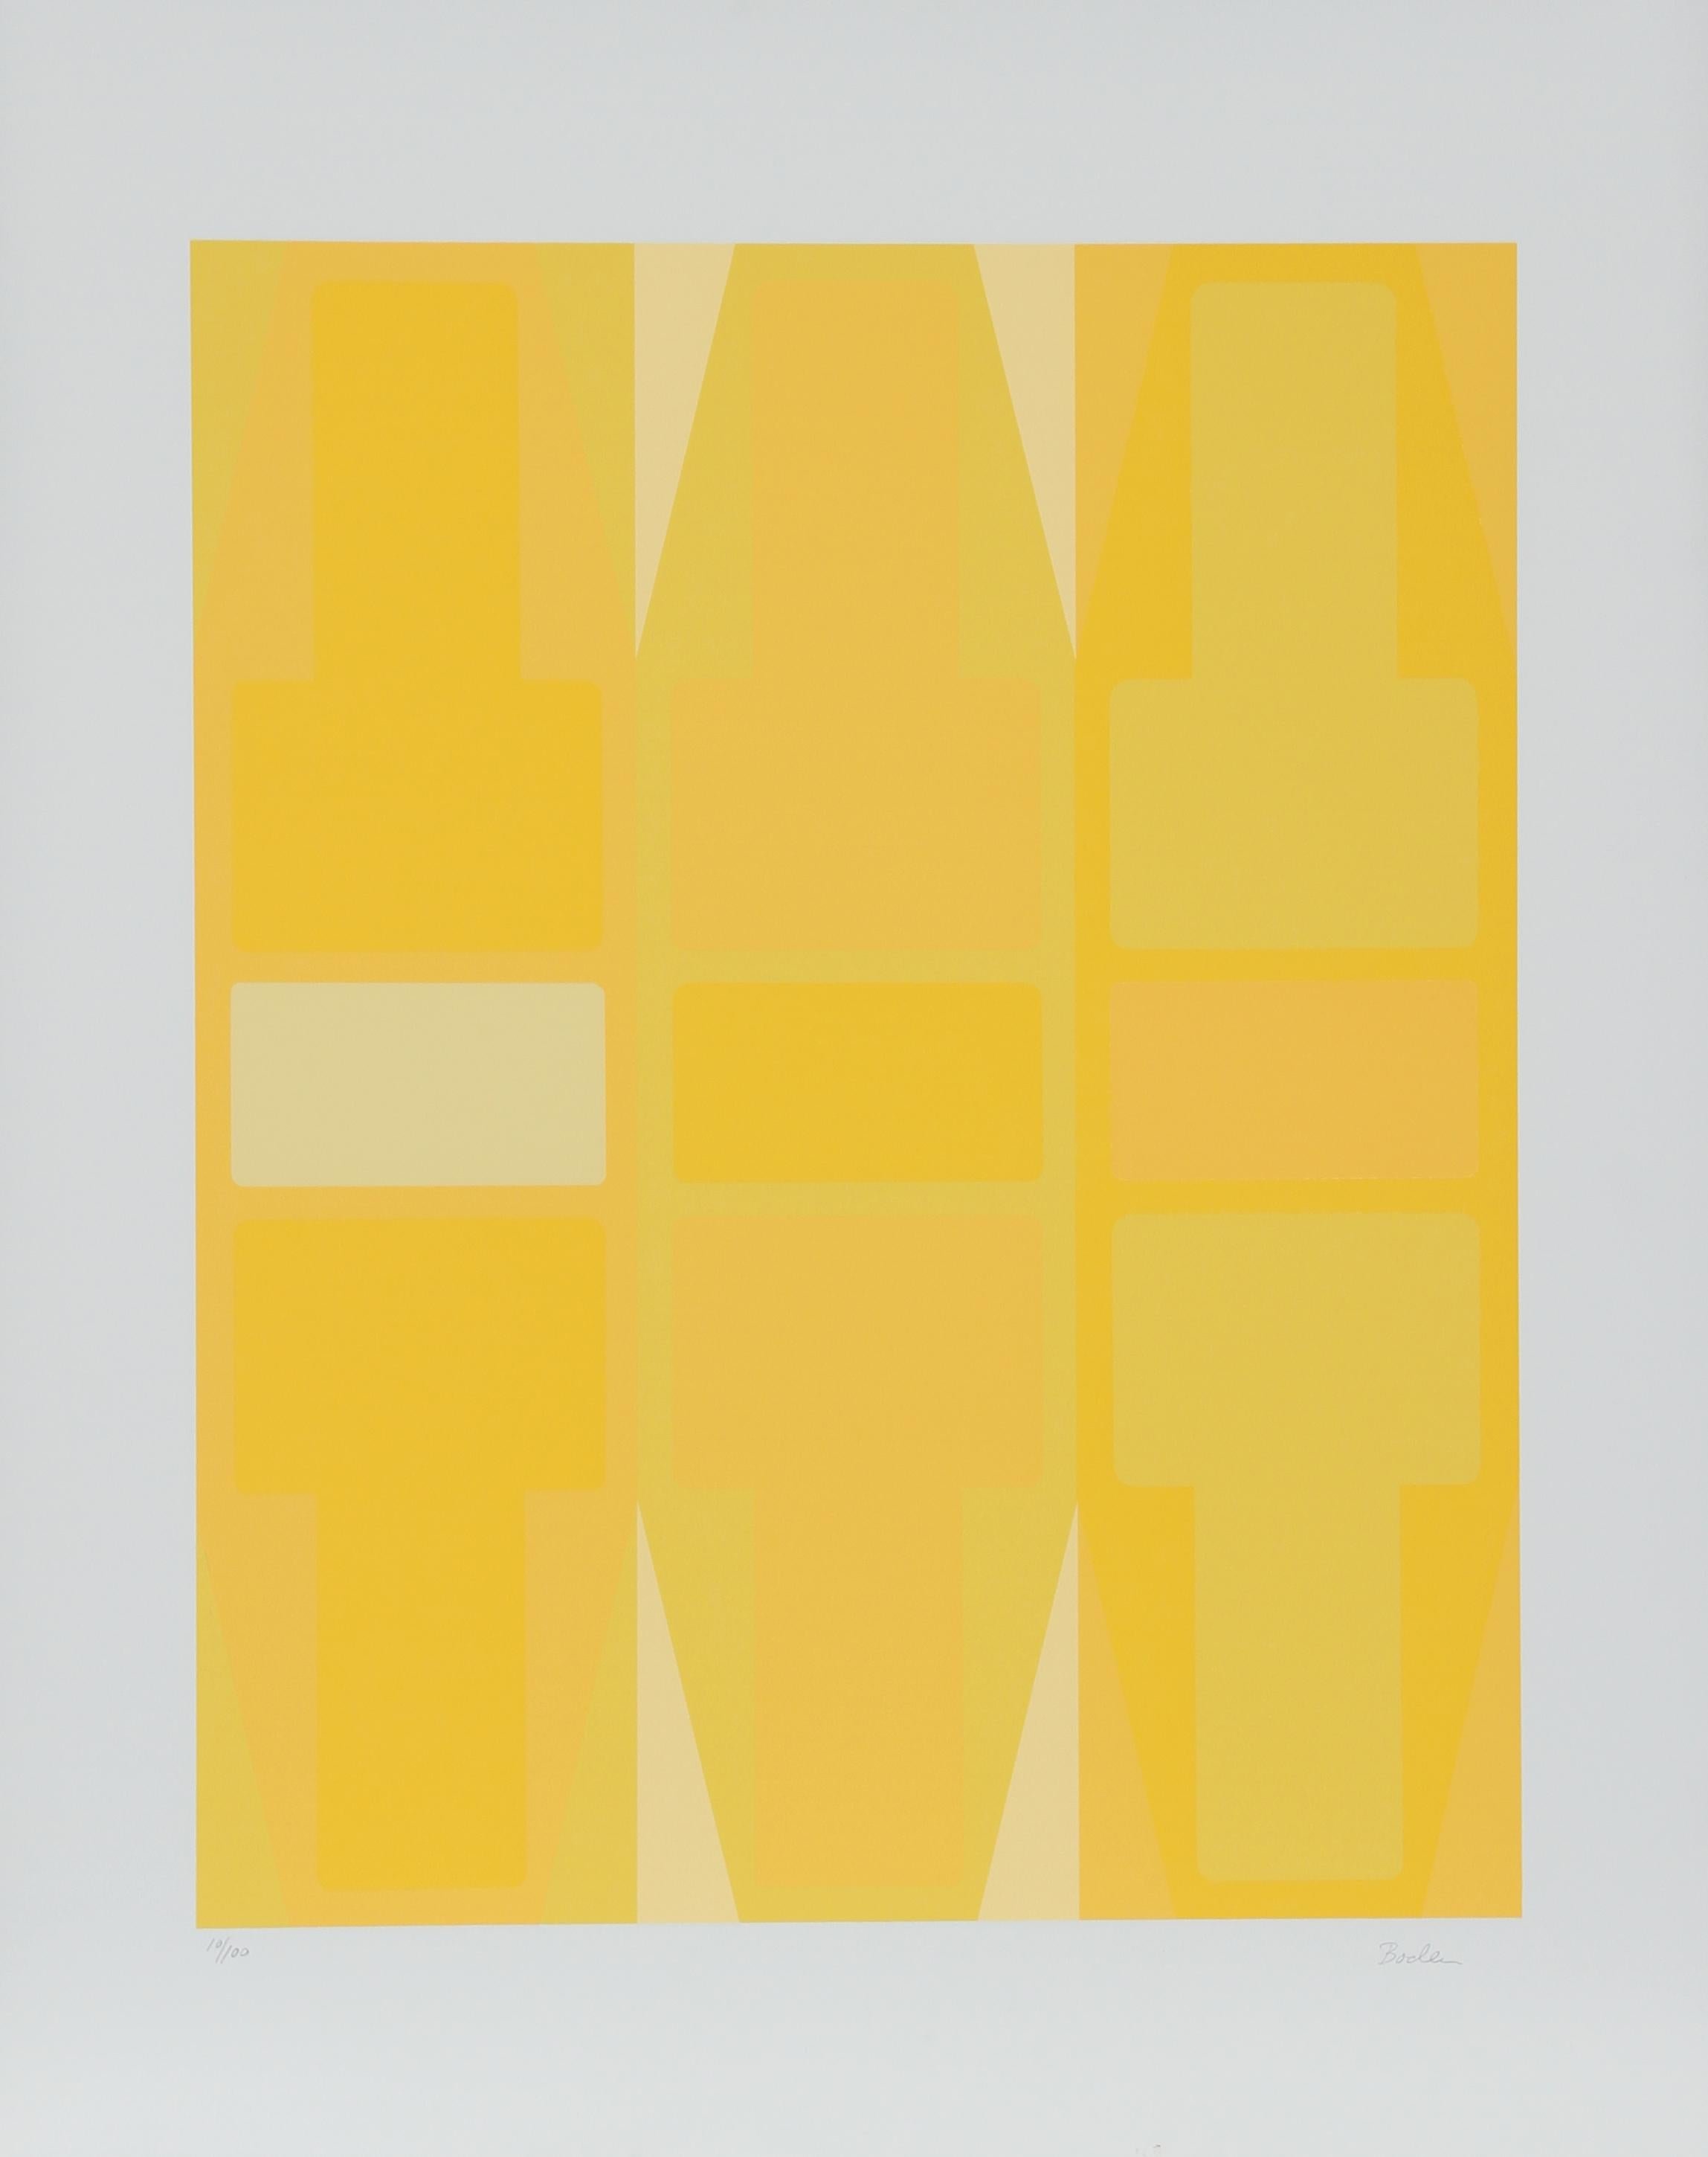 T Series (Yellow), Serigraph by Arthur Boden